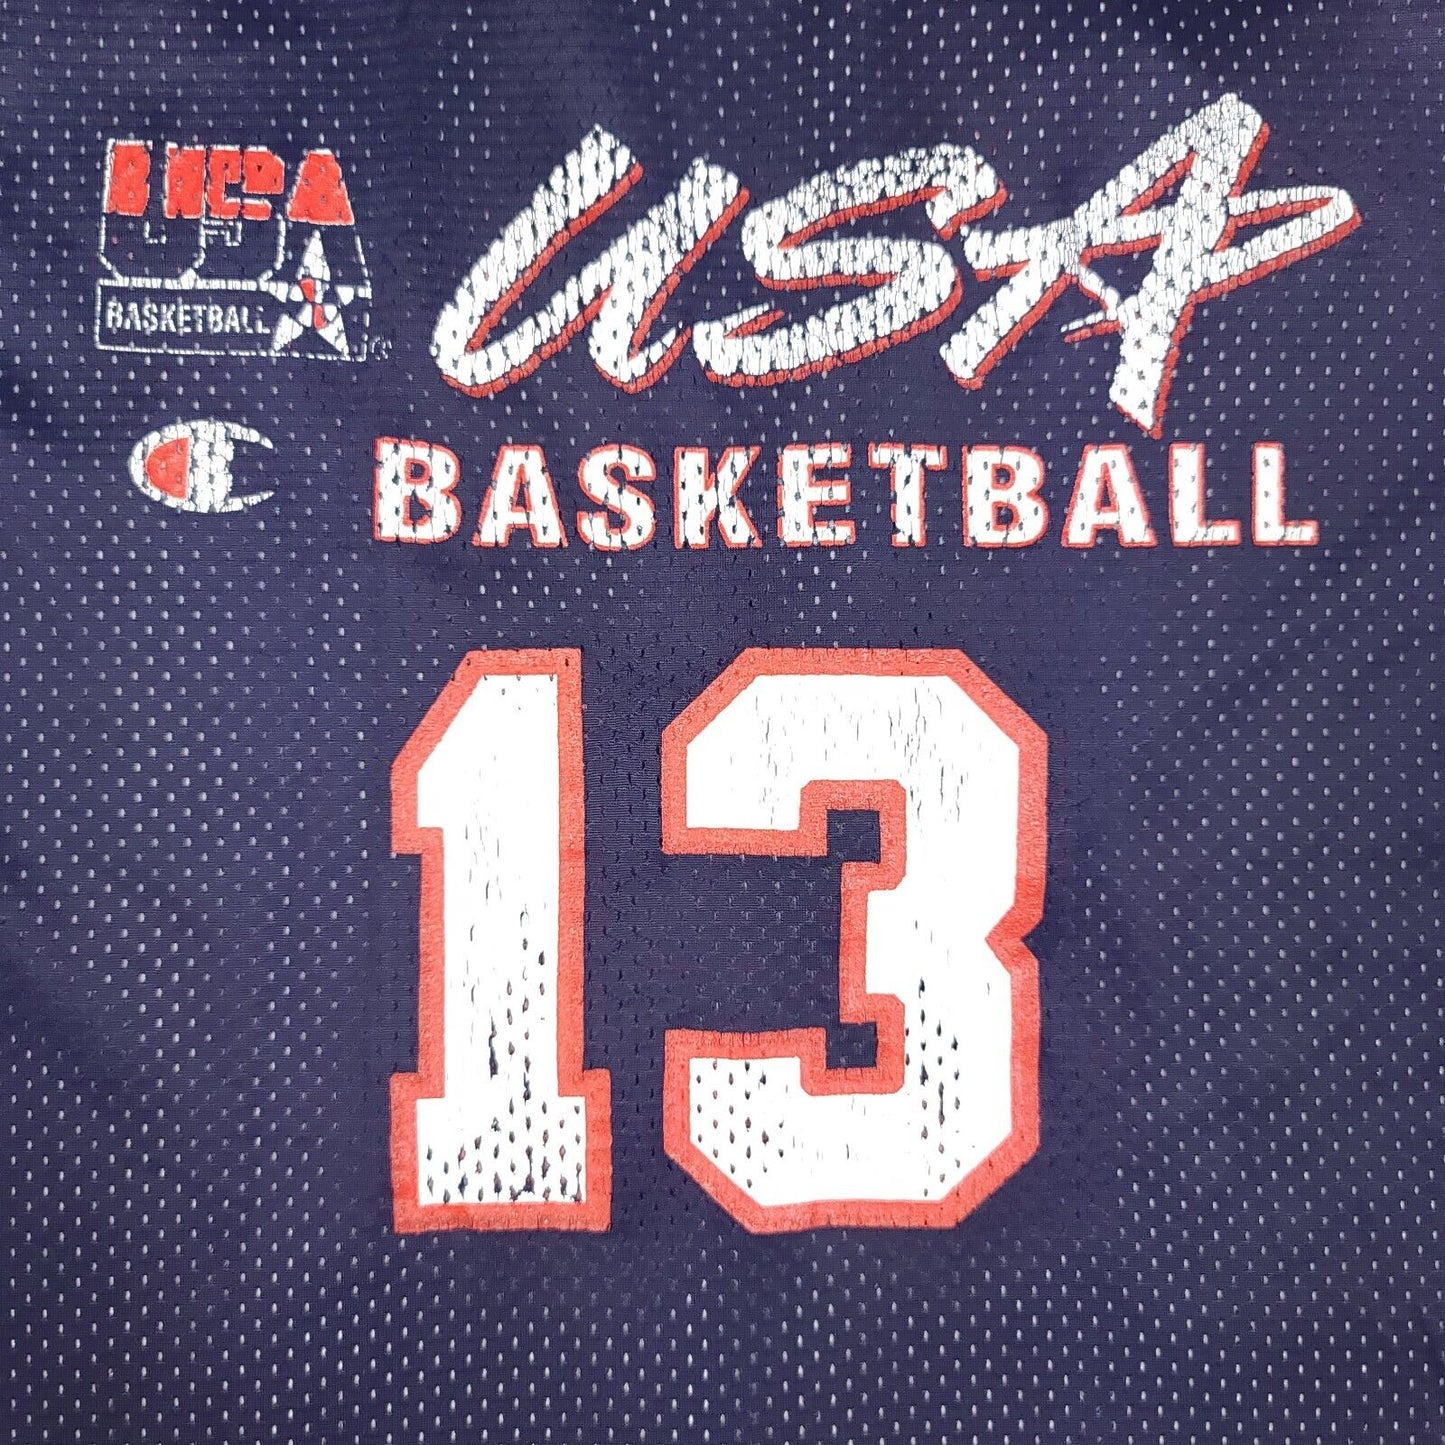 Shaquille O'Neal 1996 Olympic Dream Team Usa Champion Practice Jersey